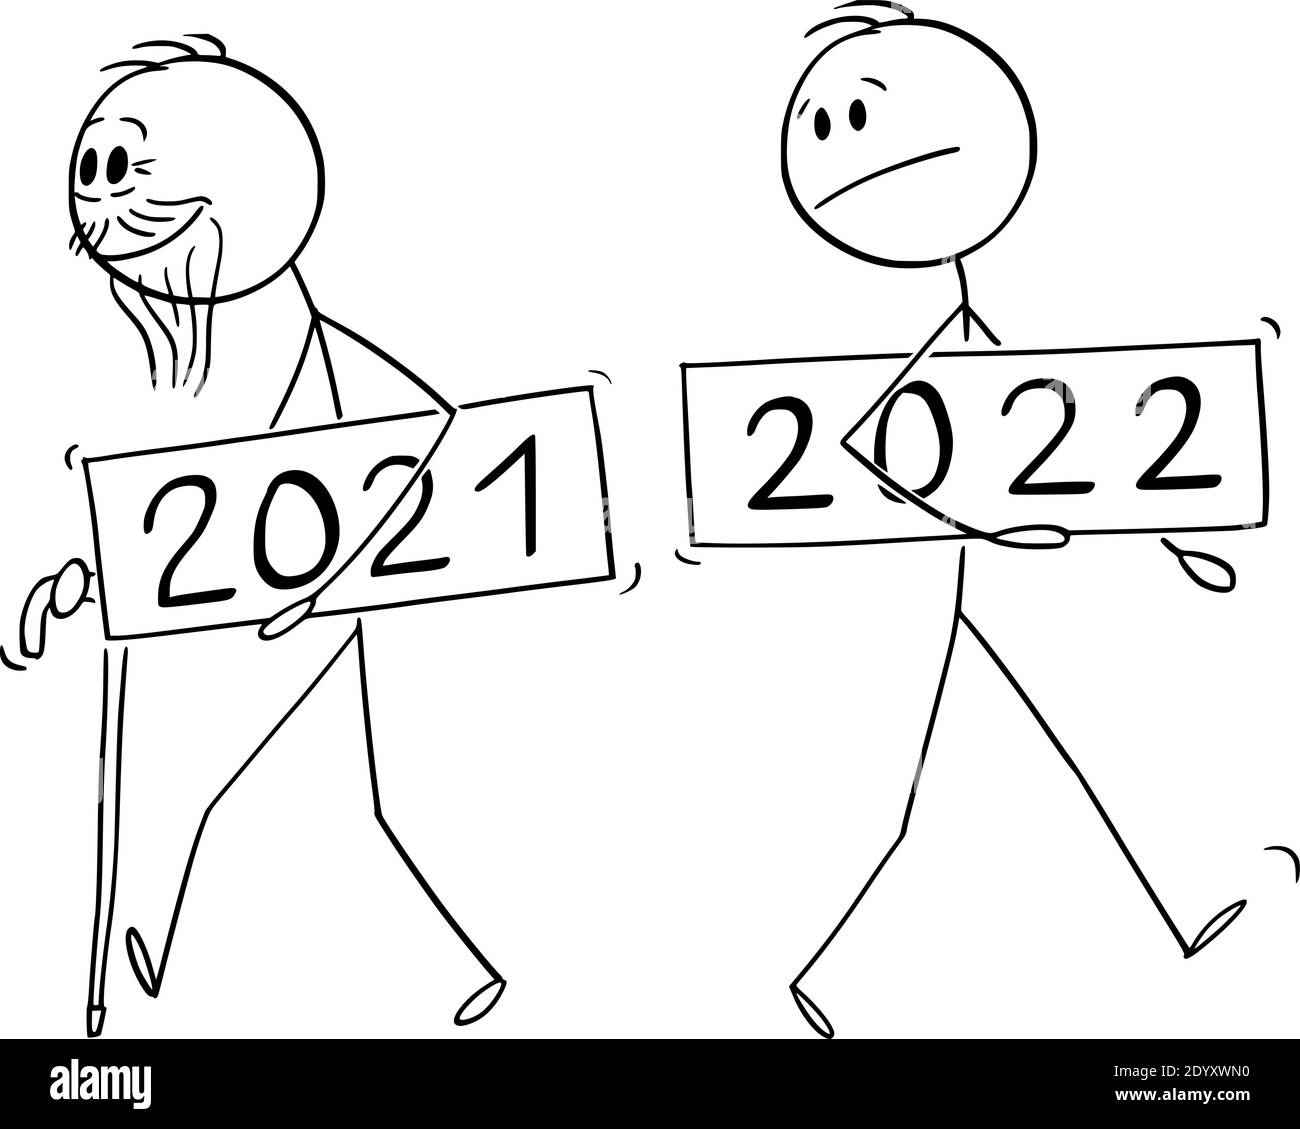 Vector cartoon stick figure illustration of old man year 2021 is leaving, new year 2022 is incoming. Stock Vector